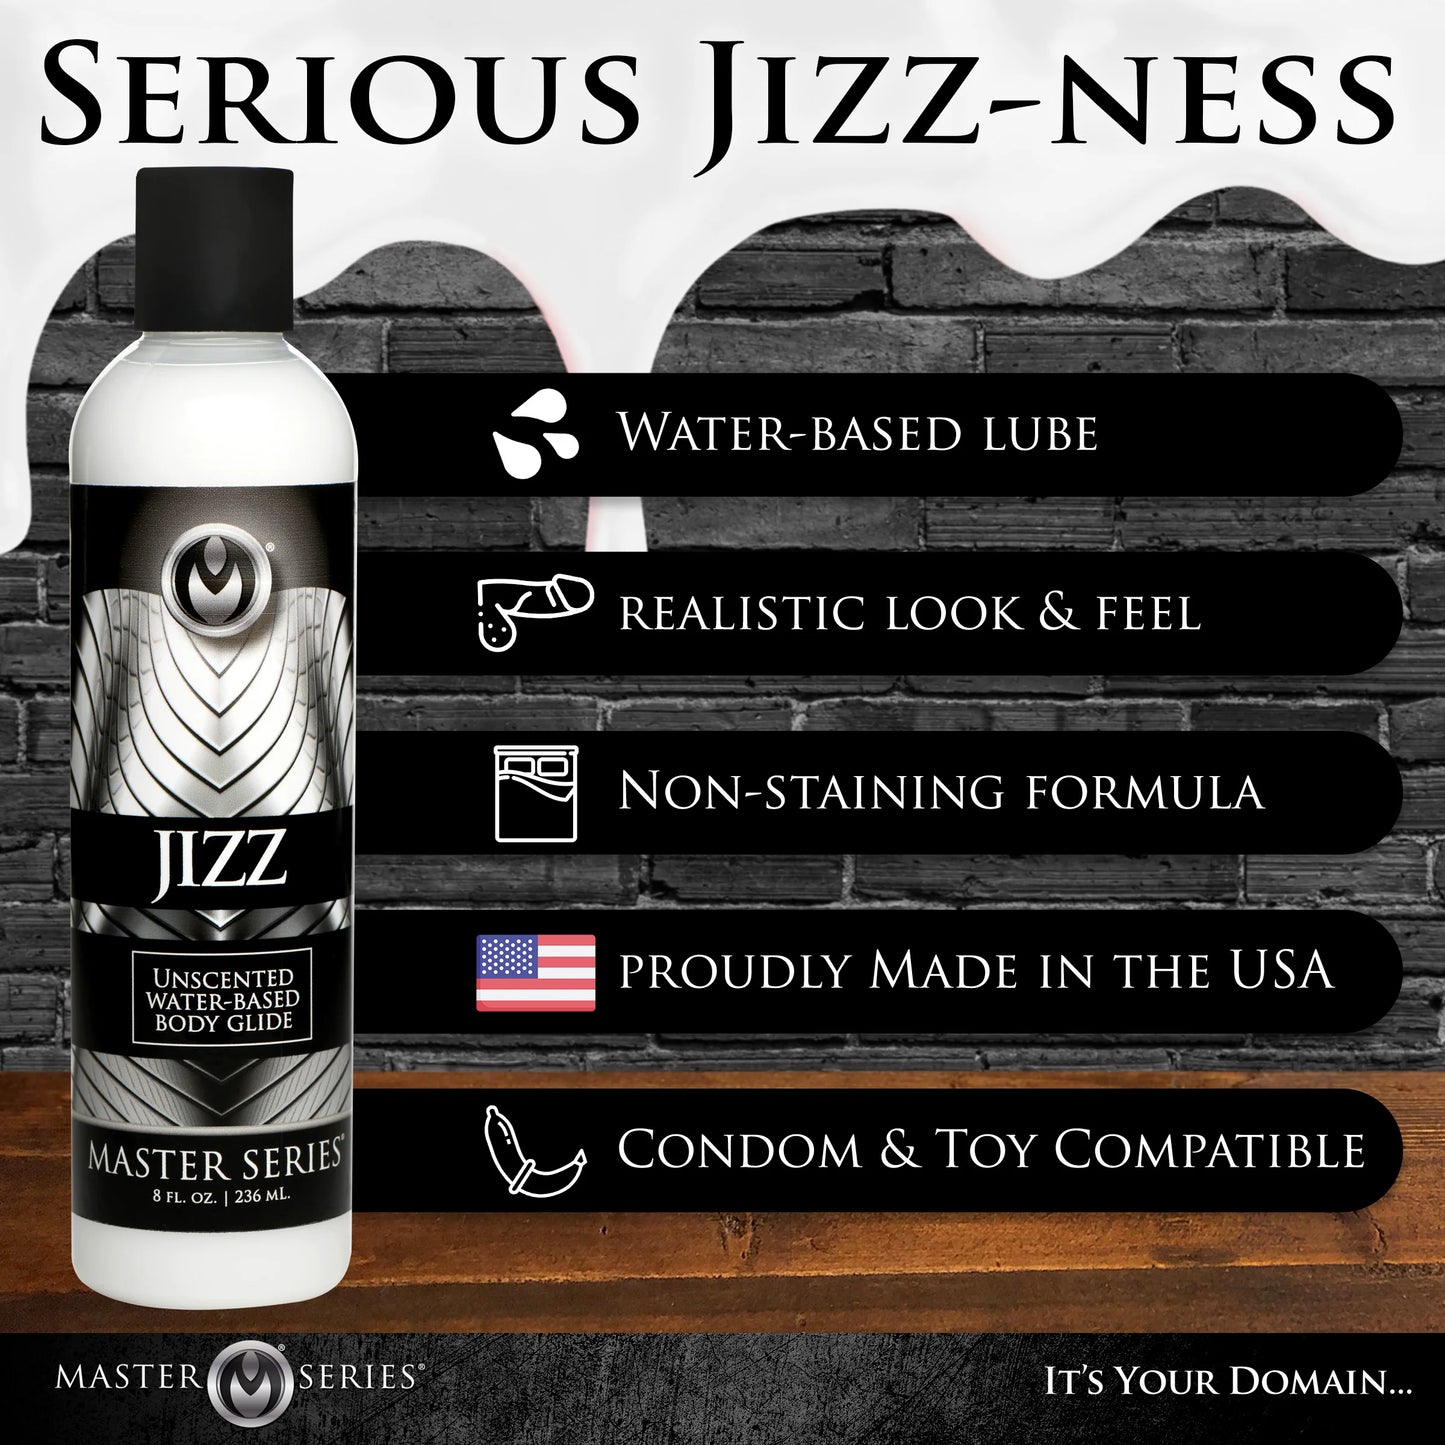 Master Series Jizz Unscented Water Based Lubricant